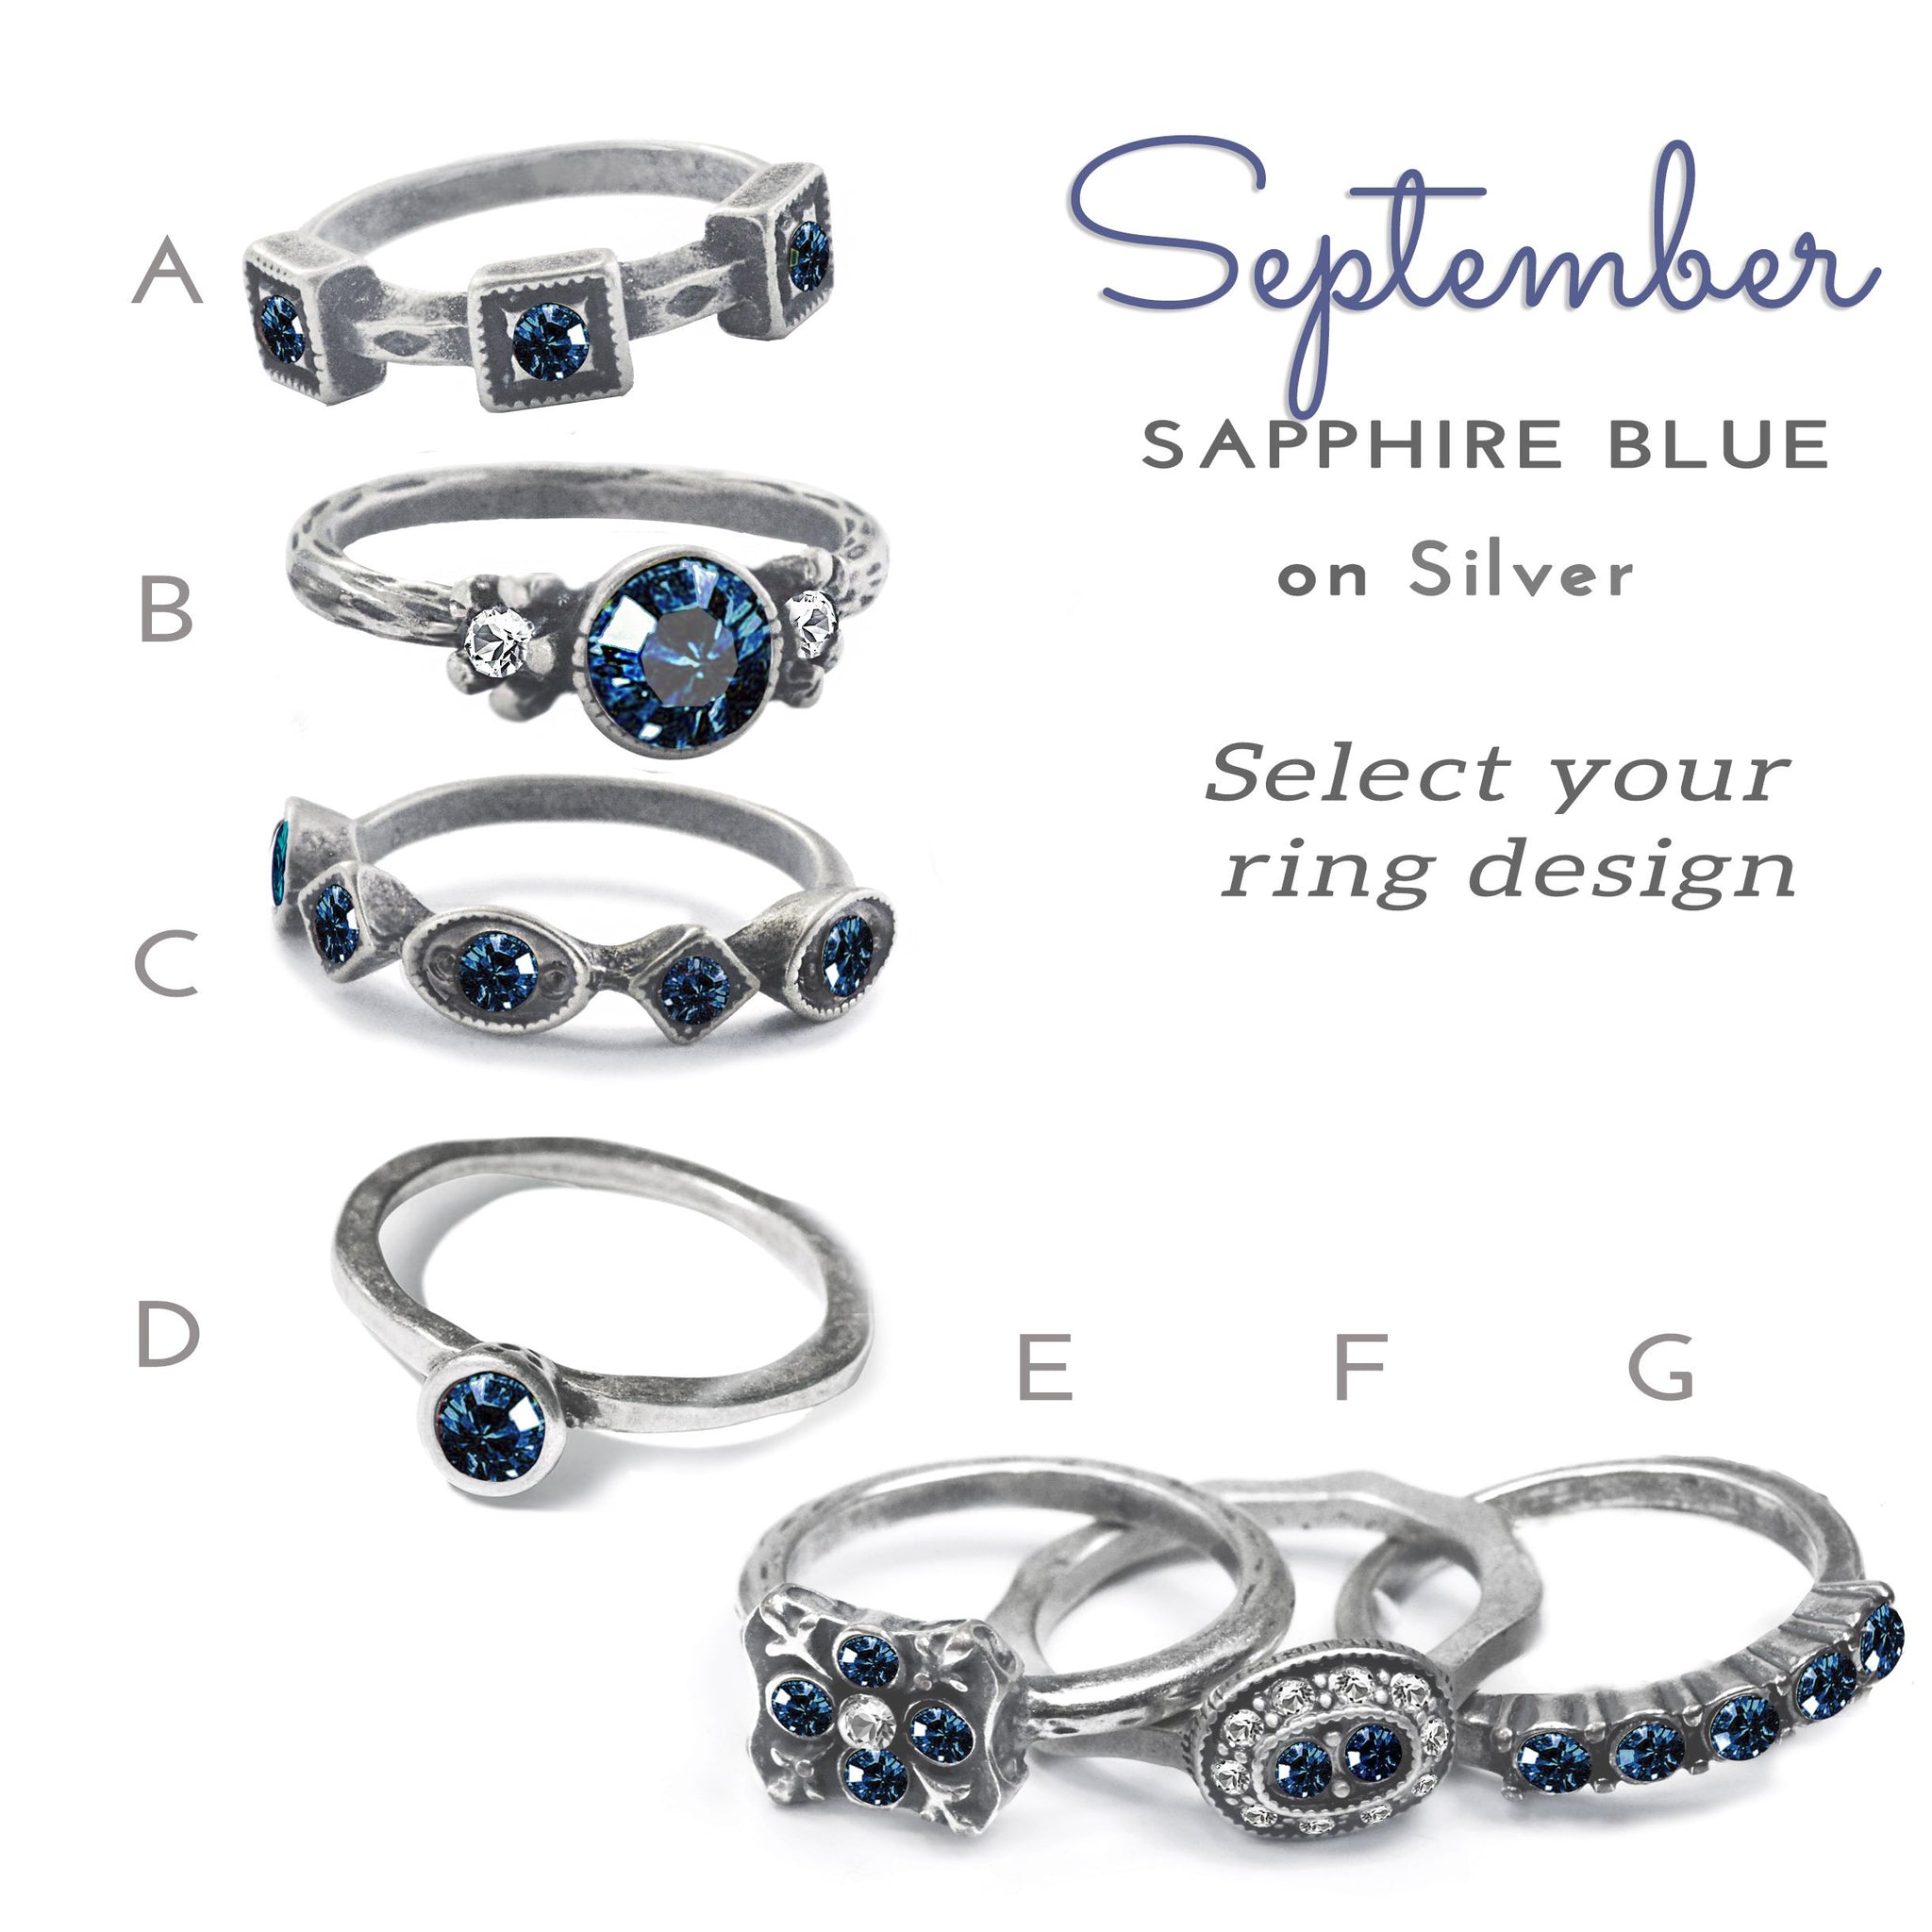 Solid Silver Ring Astrological September Birthstone Ring Natural Sapphire  Ring | eBay